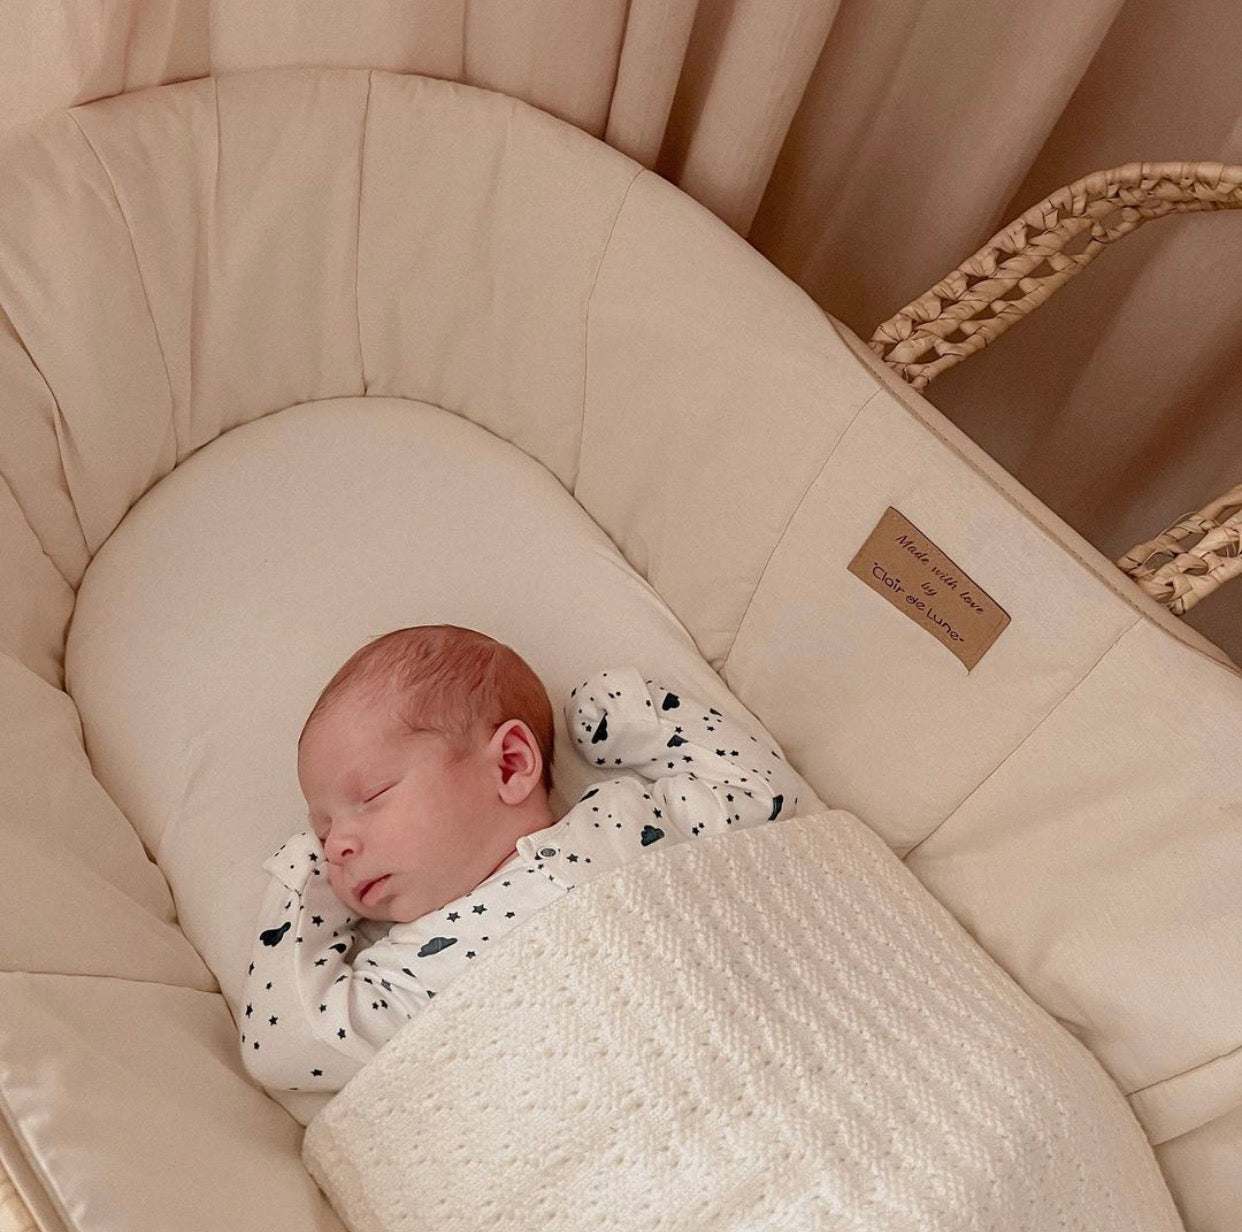 Newborn baby asleep in a cream Organic Cotton Moses Baskets | Bassinets and Co Sleepers | Parenting tips and advice - Clair de Lune UK